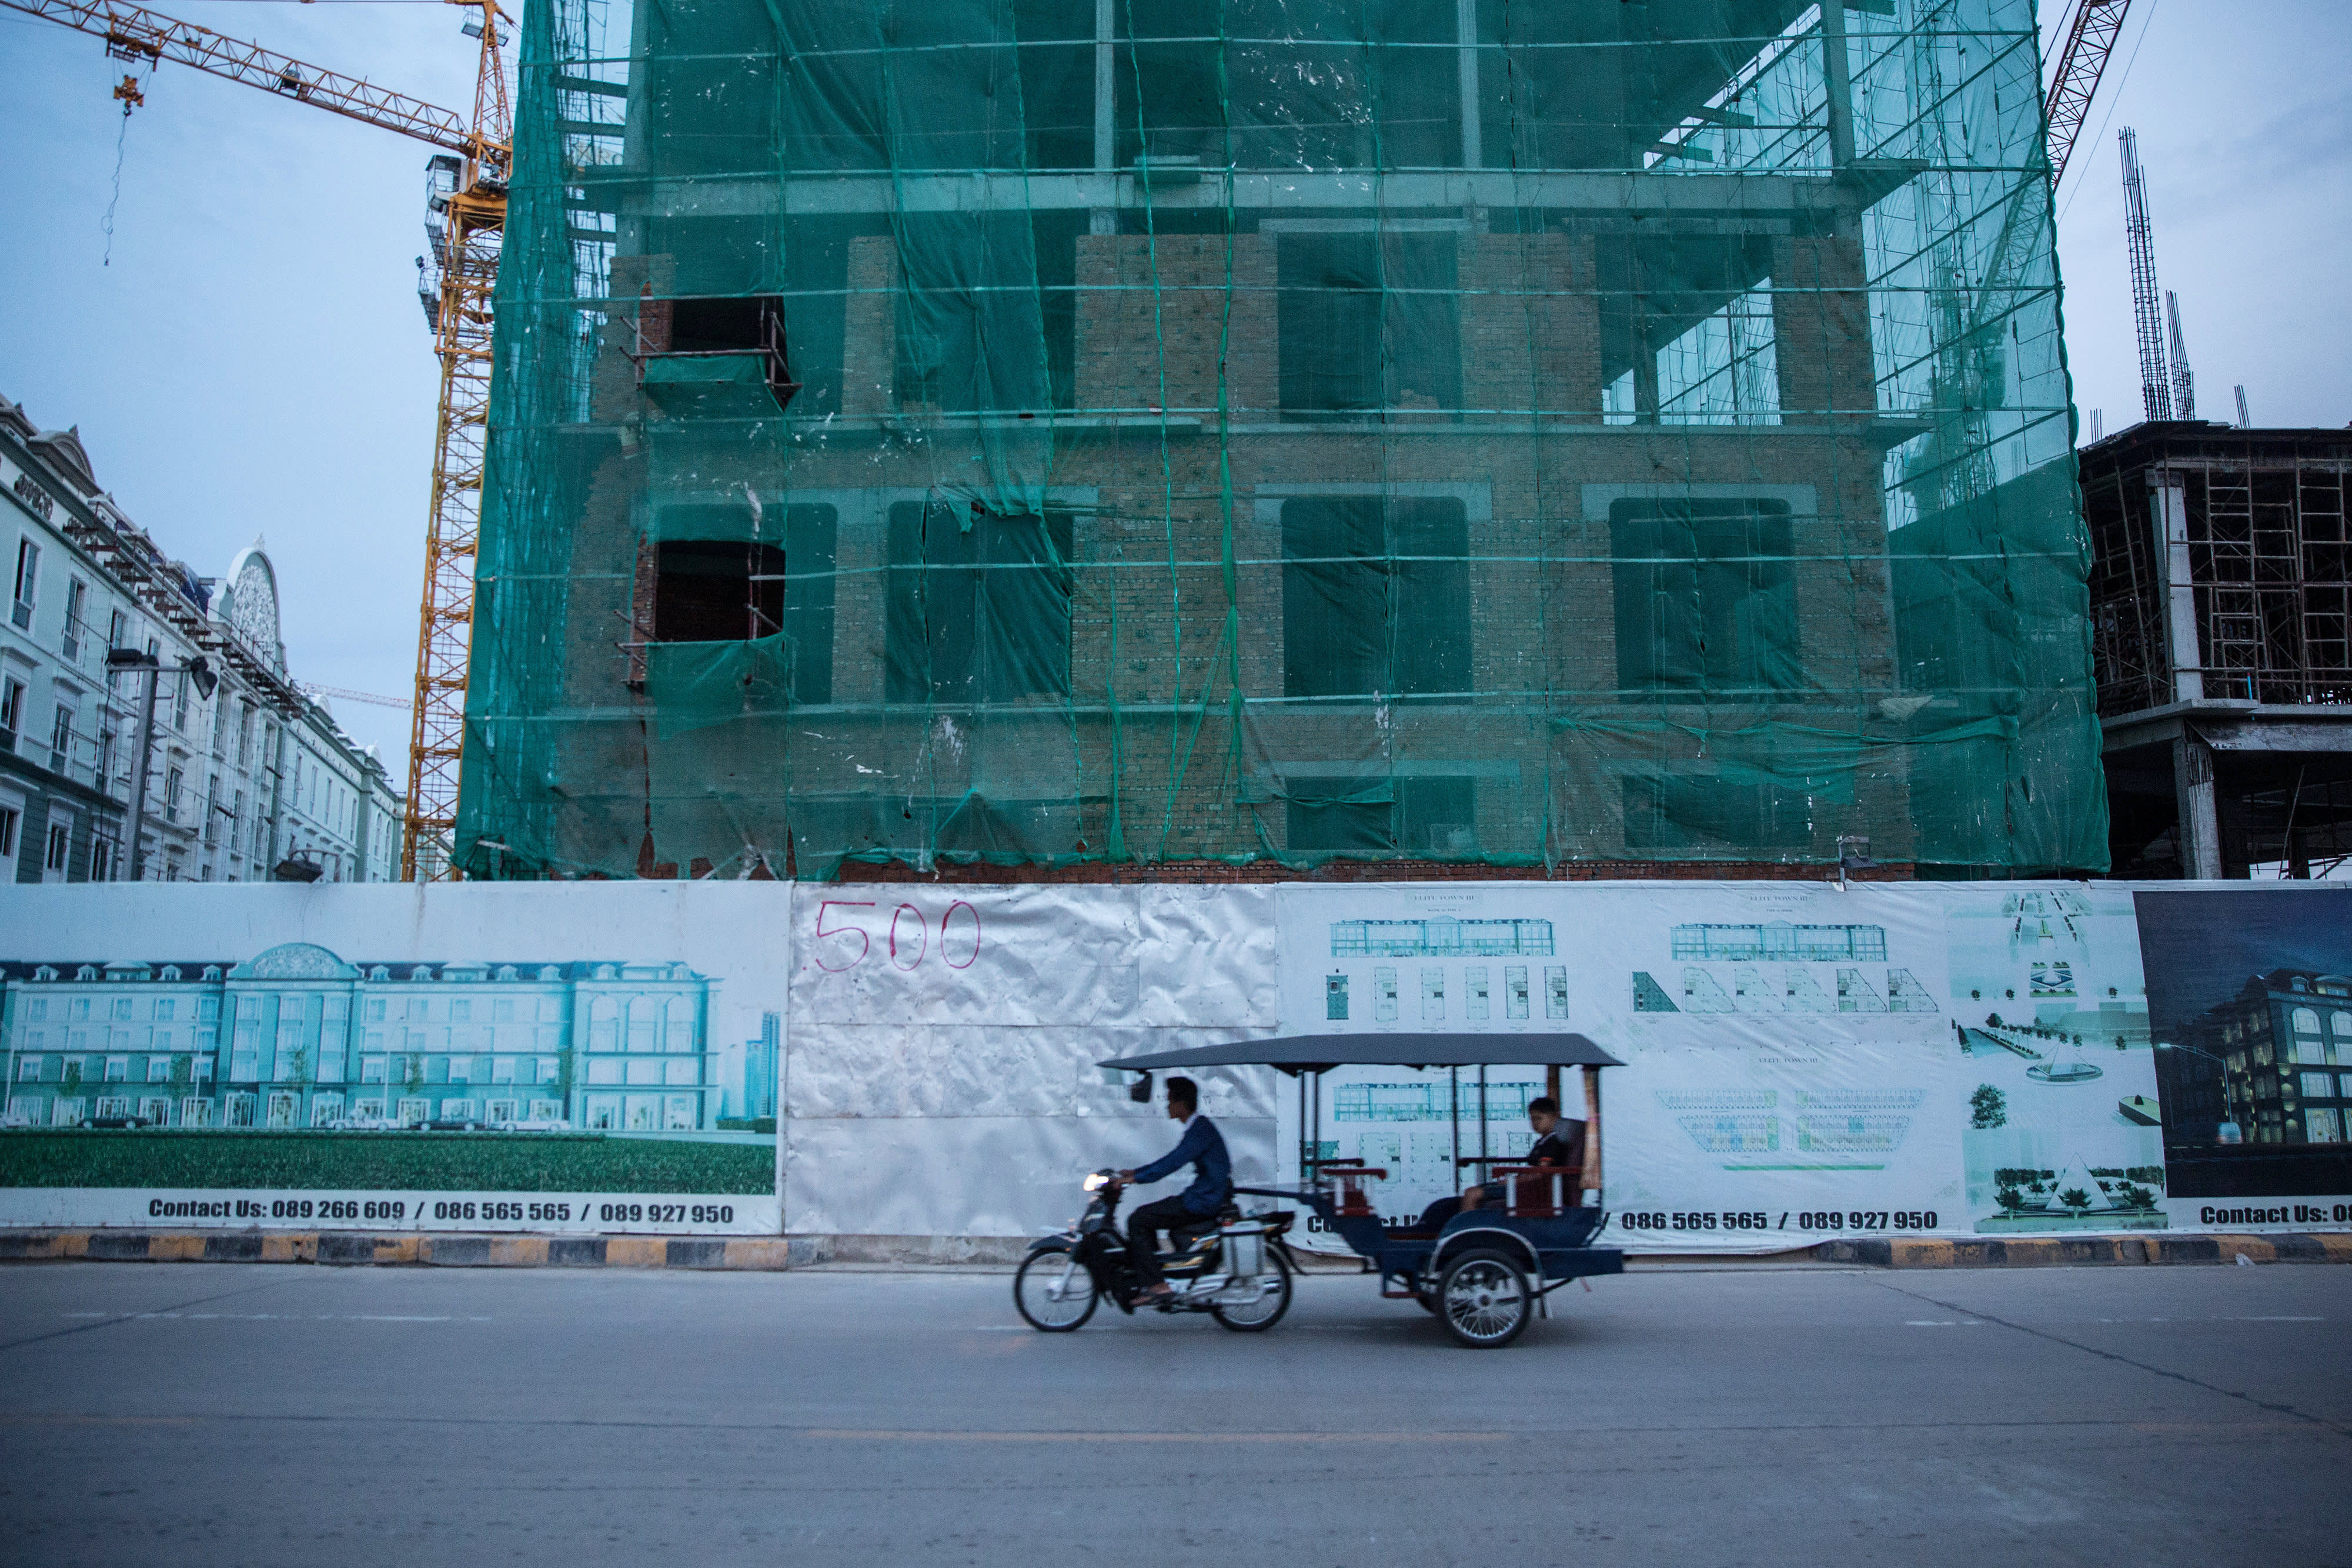 China's crackdown on housing speculation levels the playing field, major Asian real estate group says